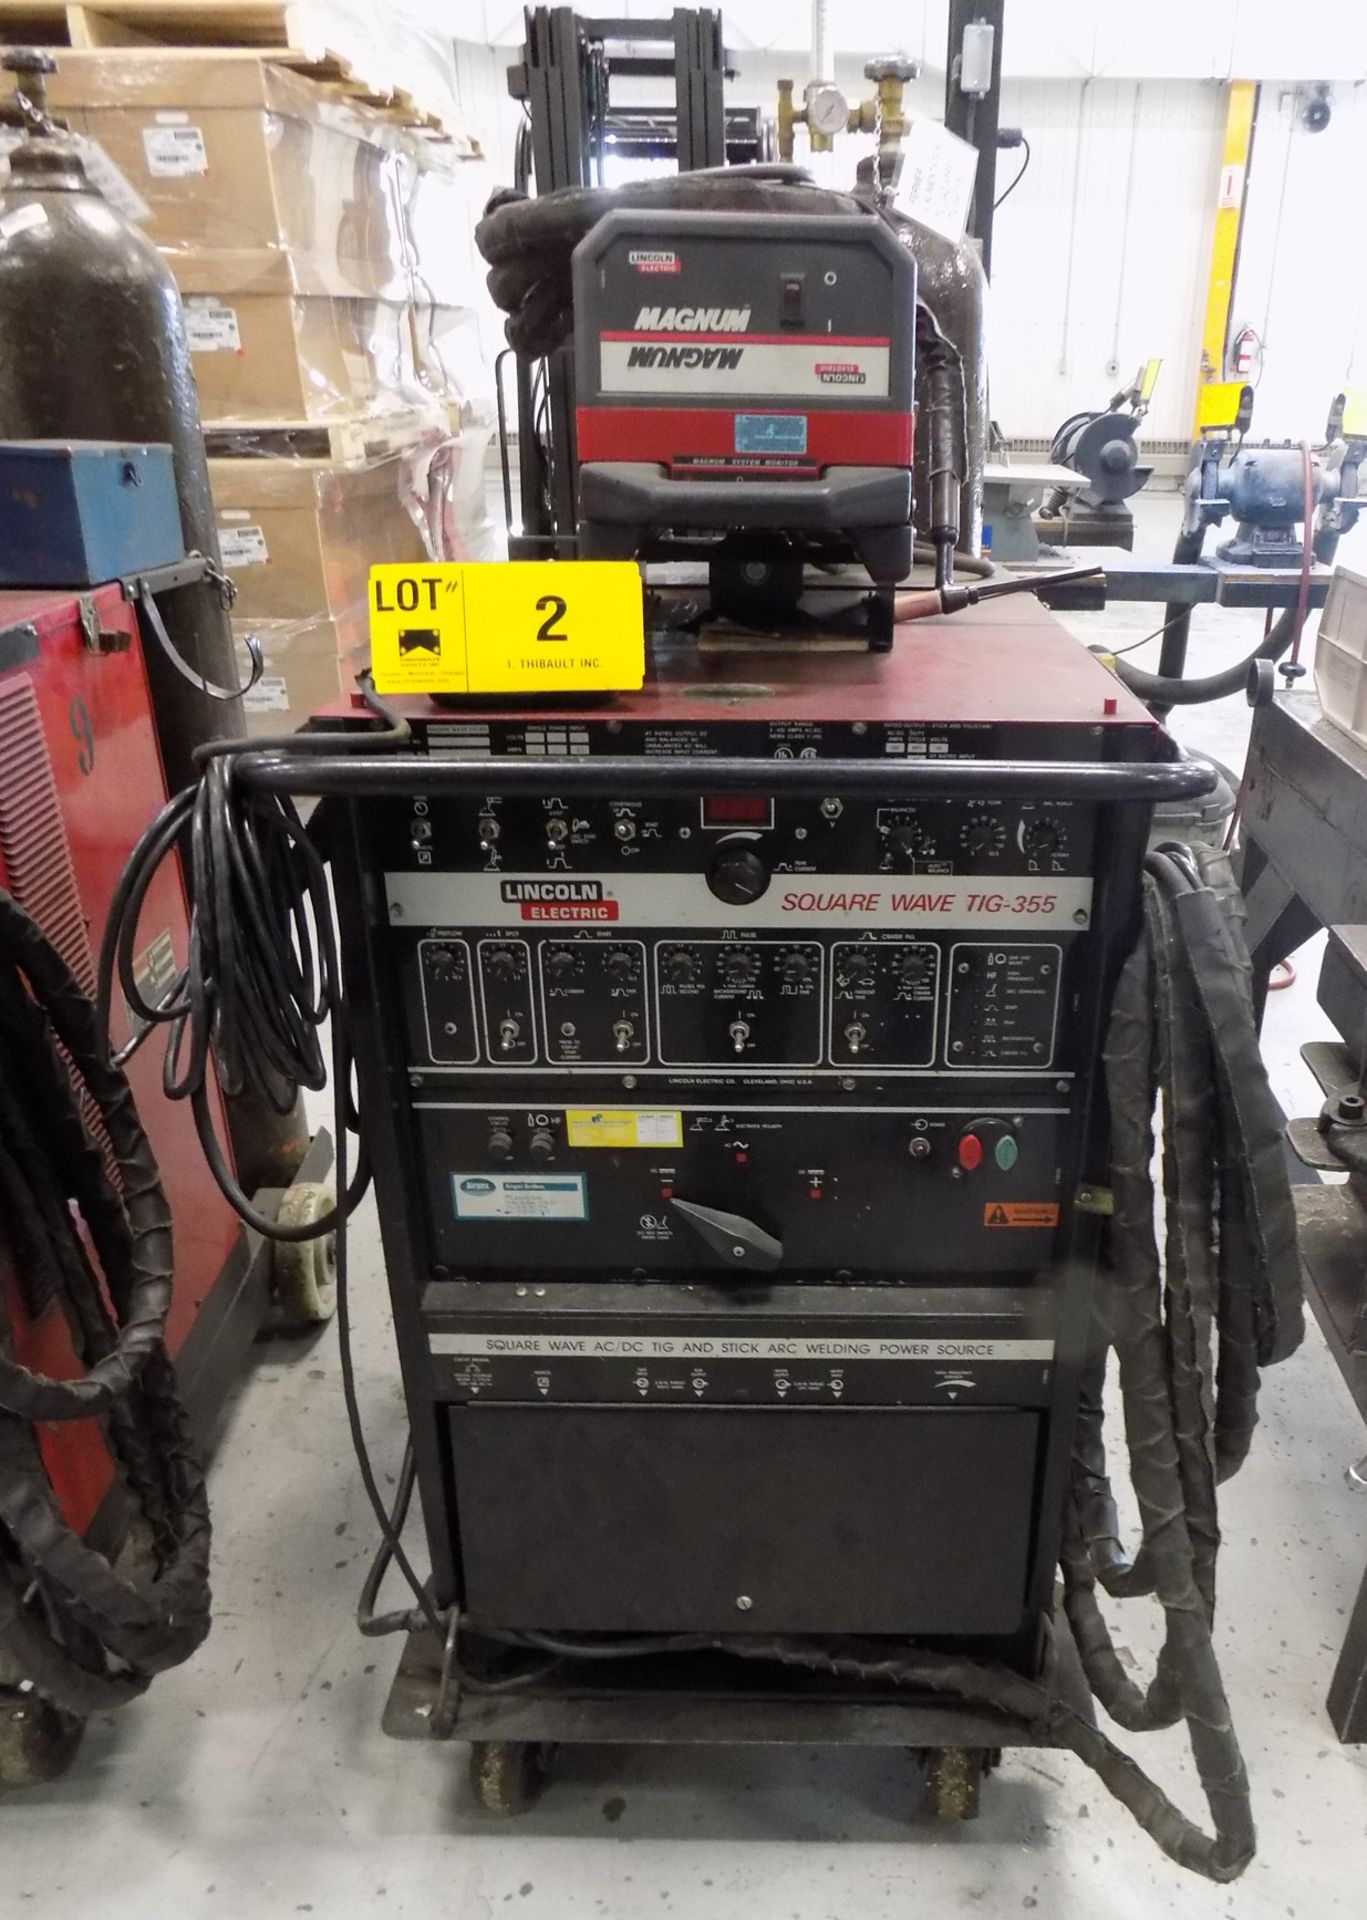 LINCOLN ELECTRIC SQUAREVAWE TIG-355 DIGITAL TIG WELDER WITH CABLES AND GUN, S/N U1970816174